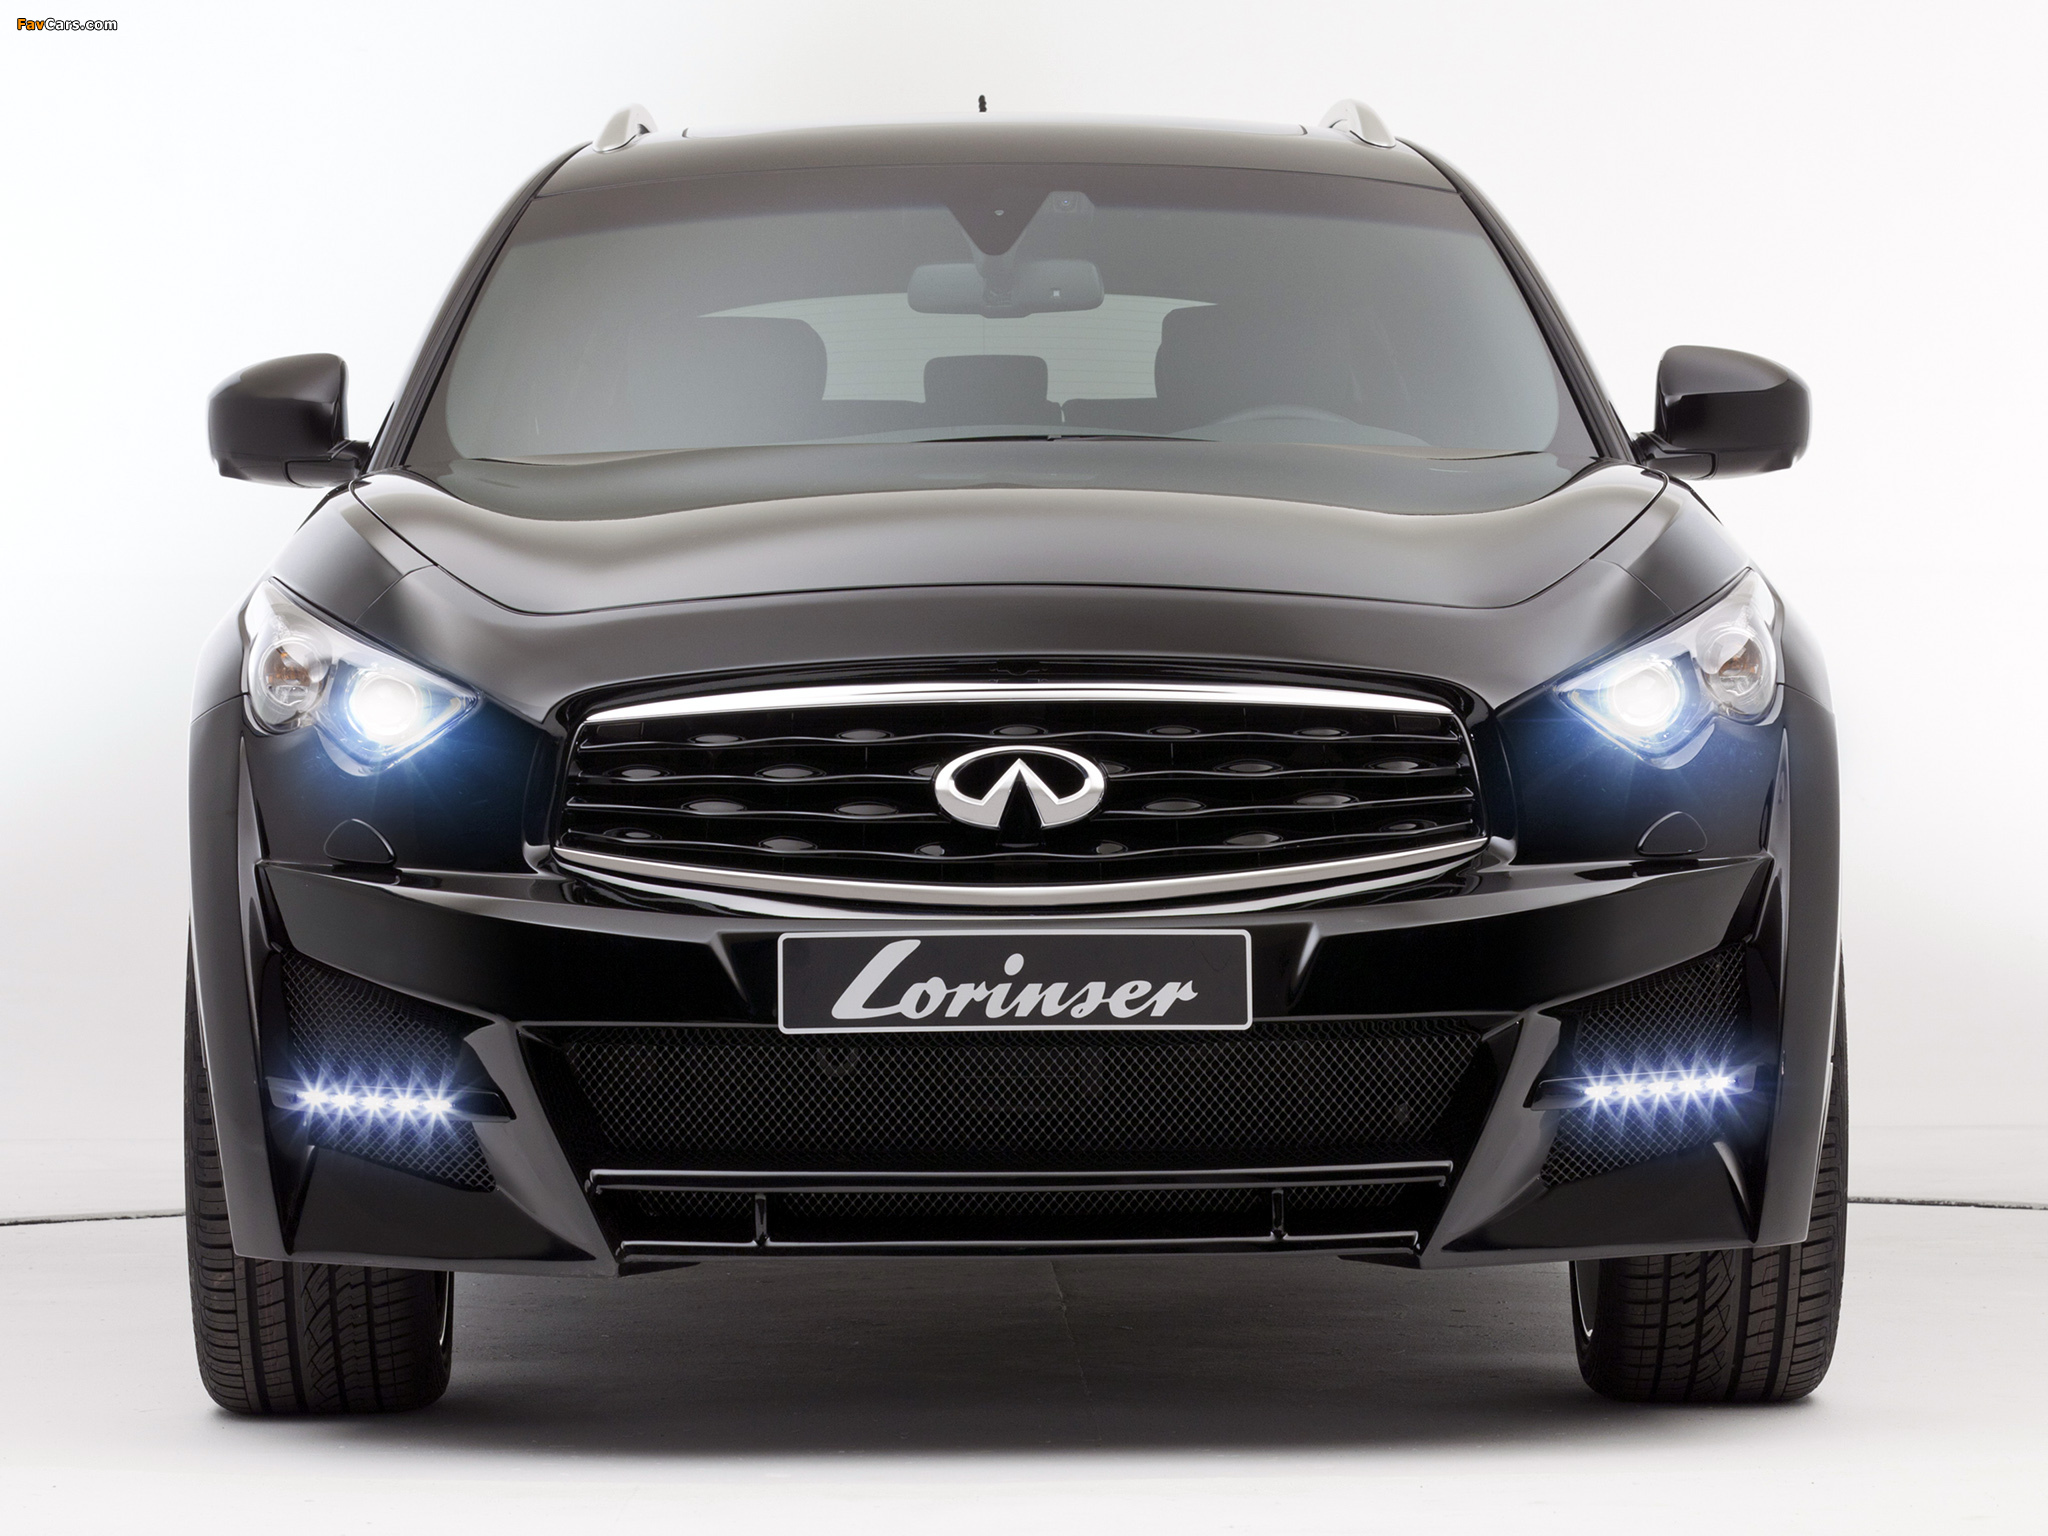 Lorinser Infiniti FX30dS (S51) 2011 pictures (2048 x 1536)